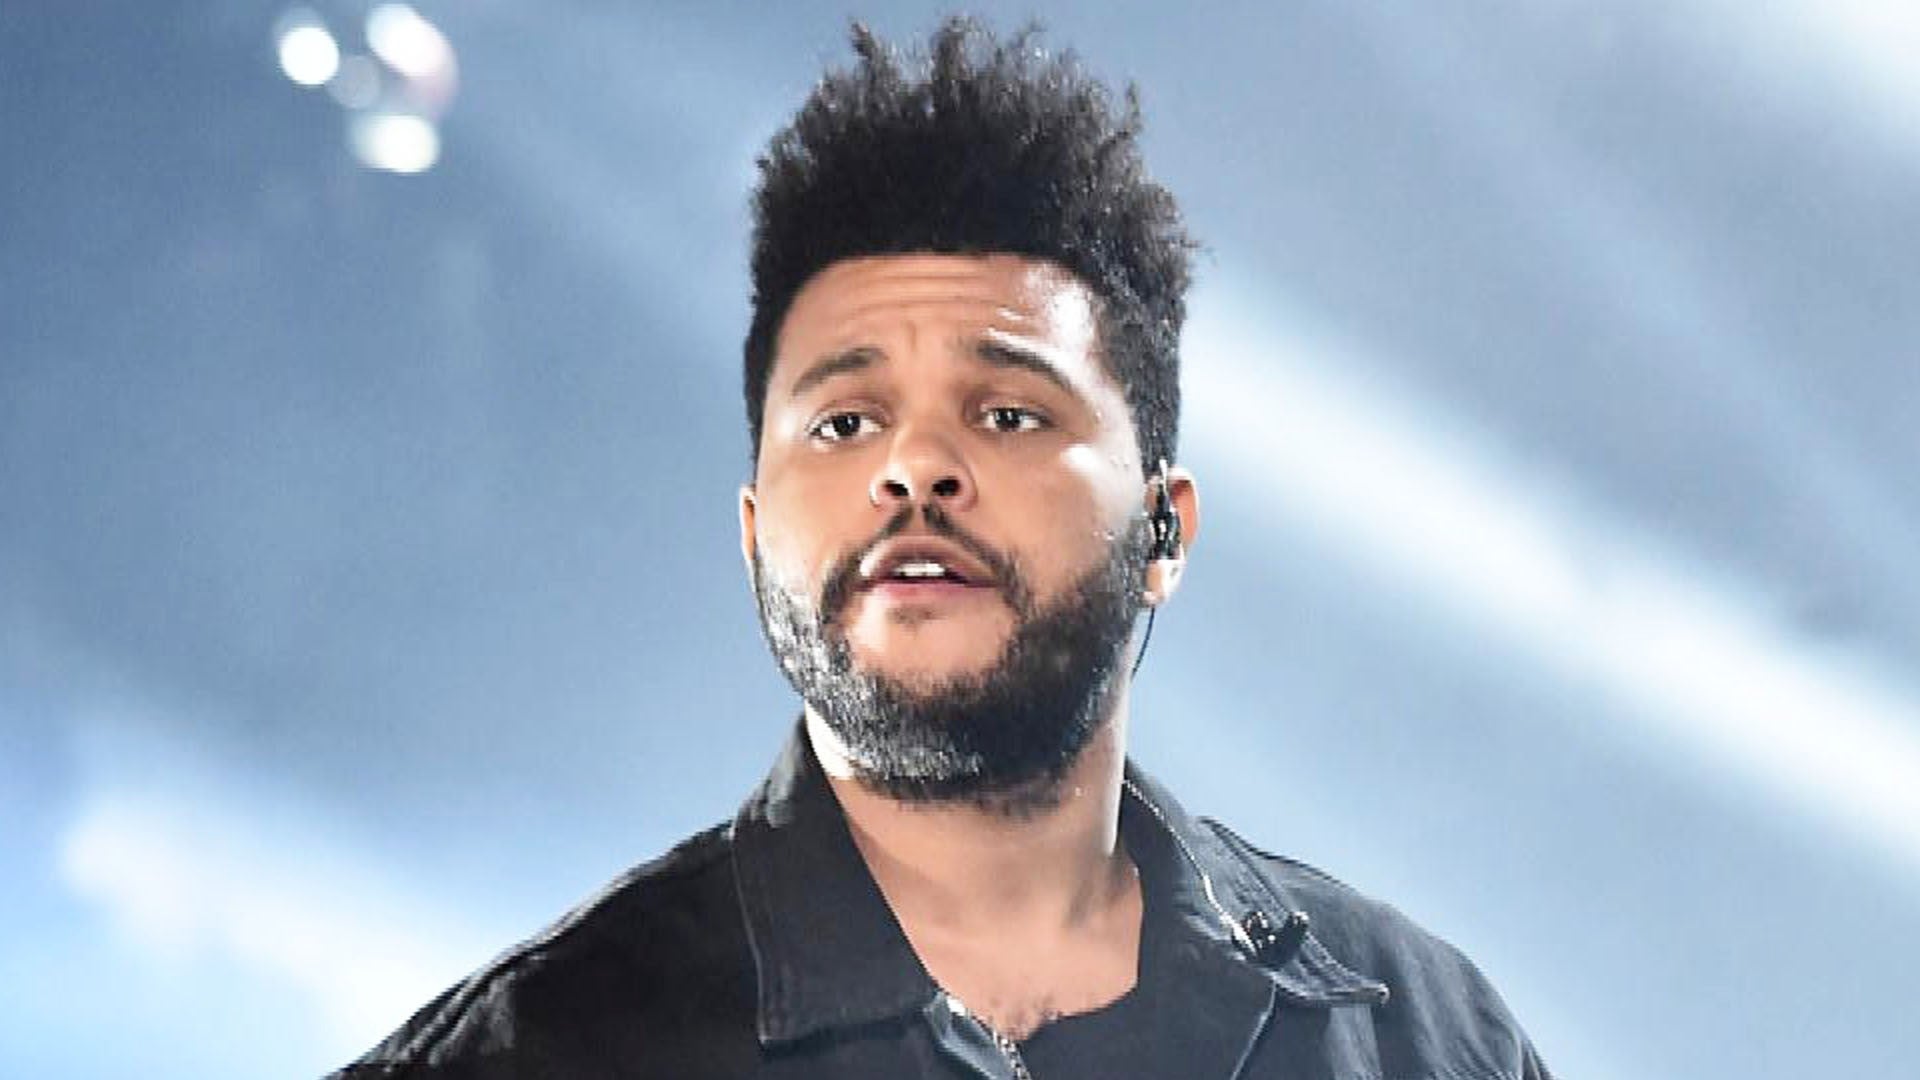 The Weeknd's Super Bowl Halftime Performance: Everything We Know